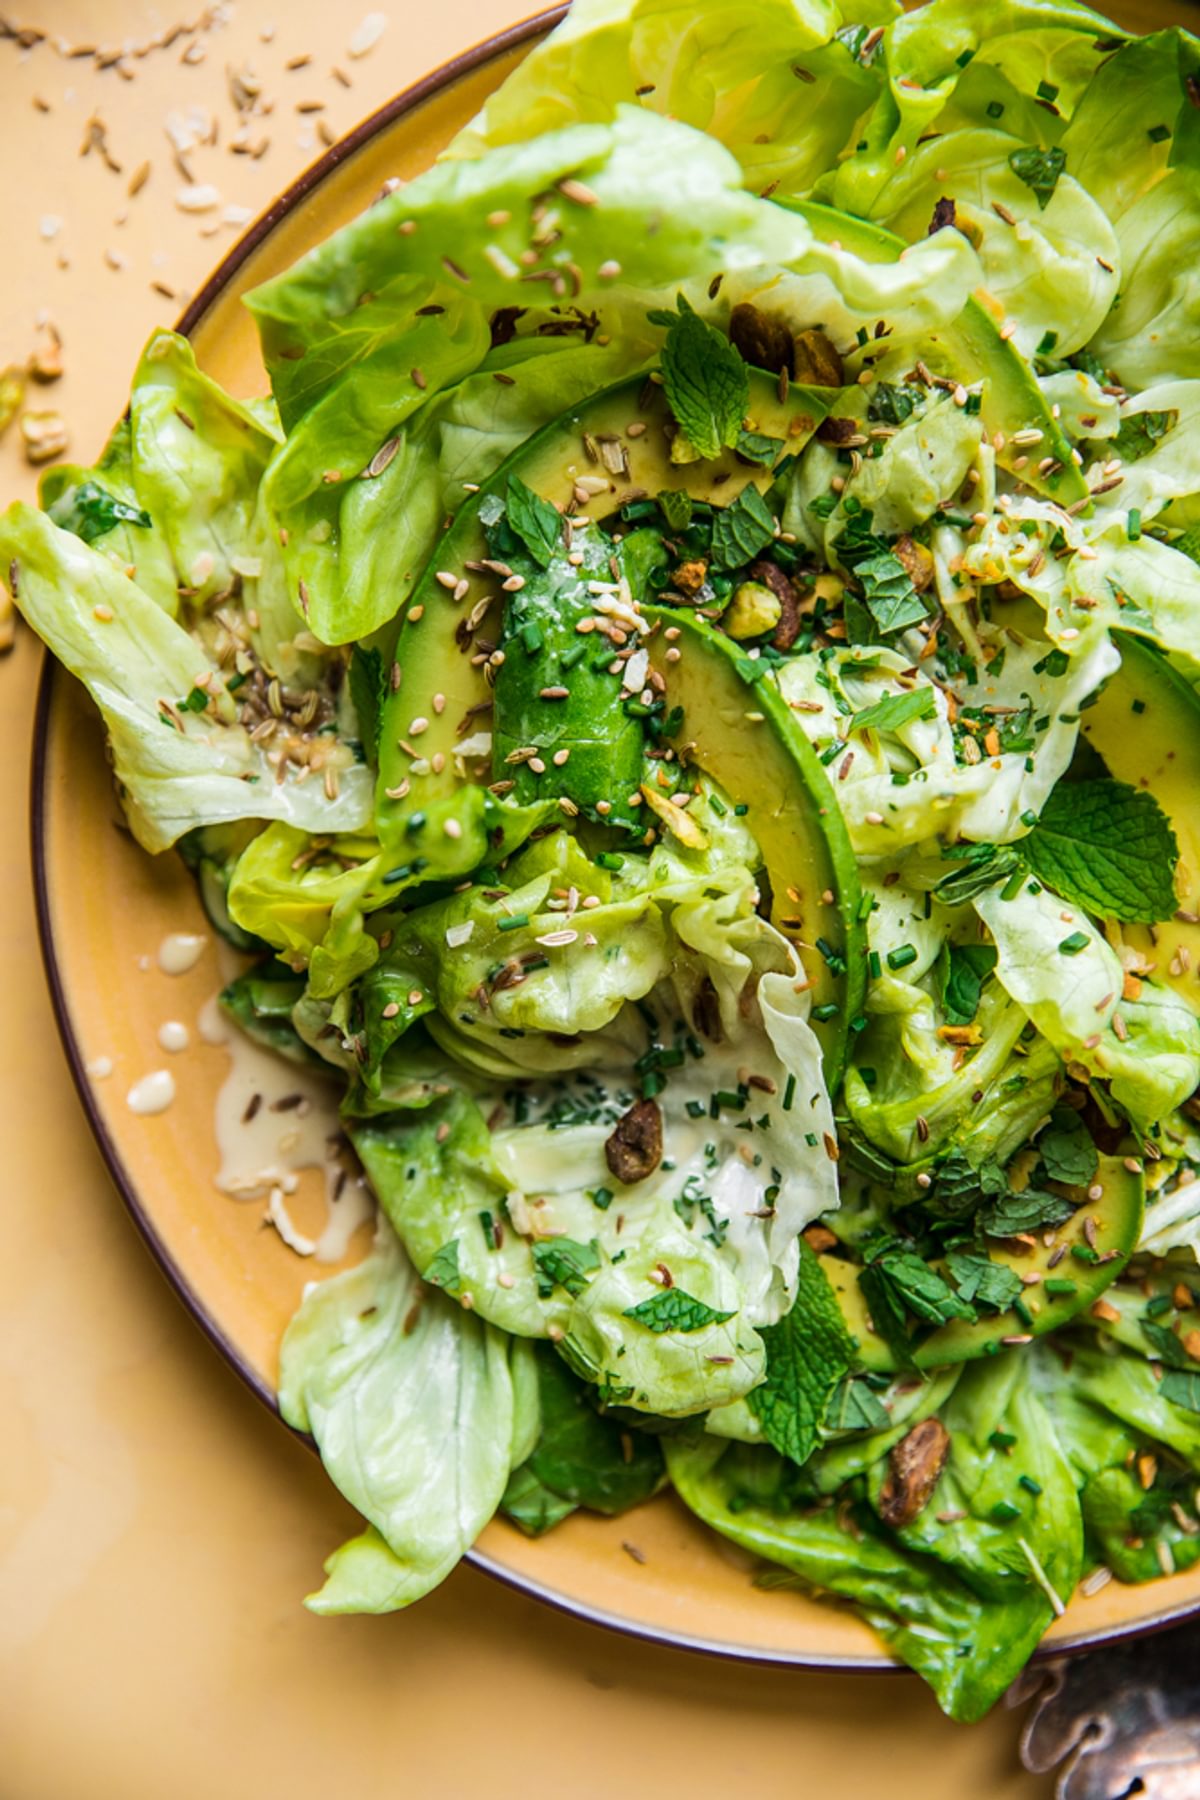 Butter lettuce salad recipe with a delicious sesame tahini dressing, fresh herbs and a seed mixture